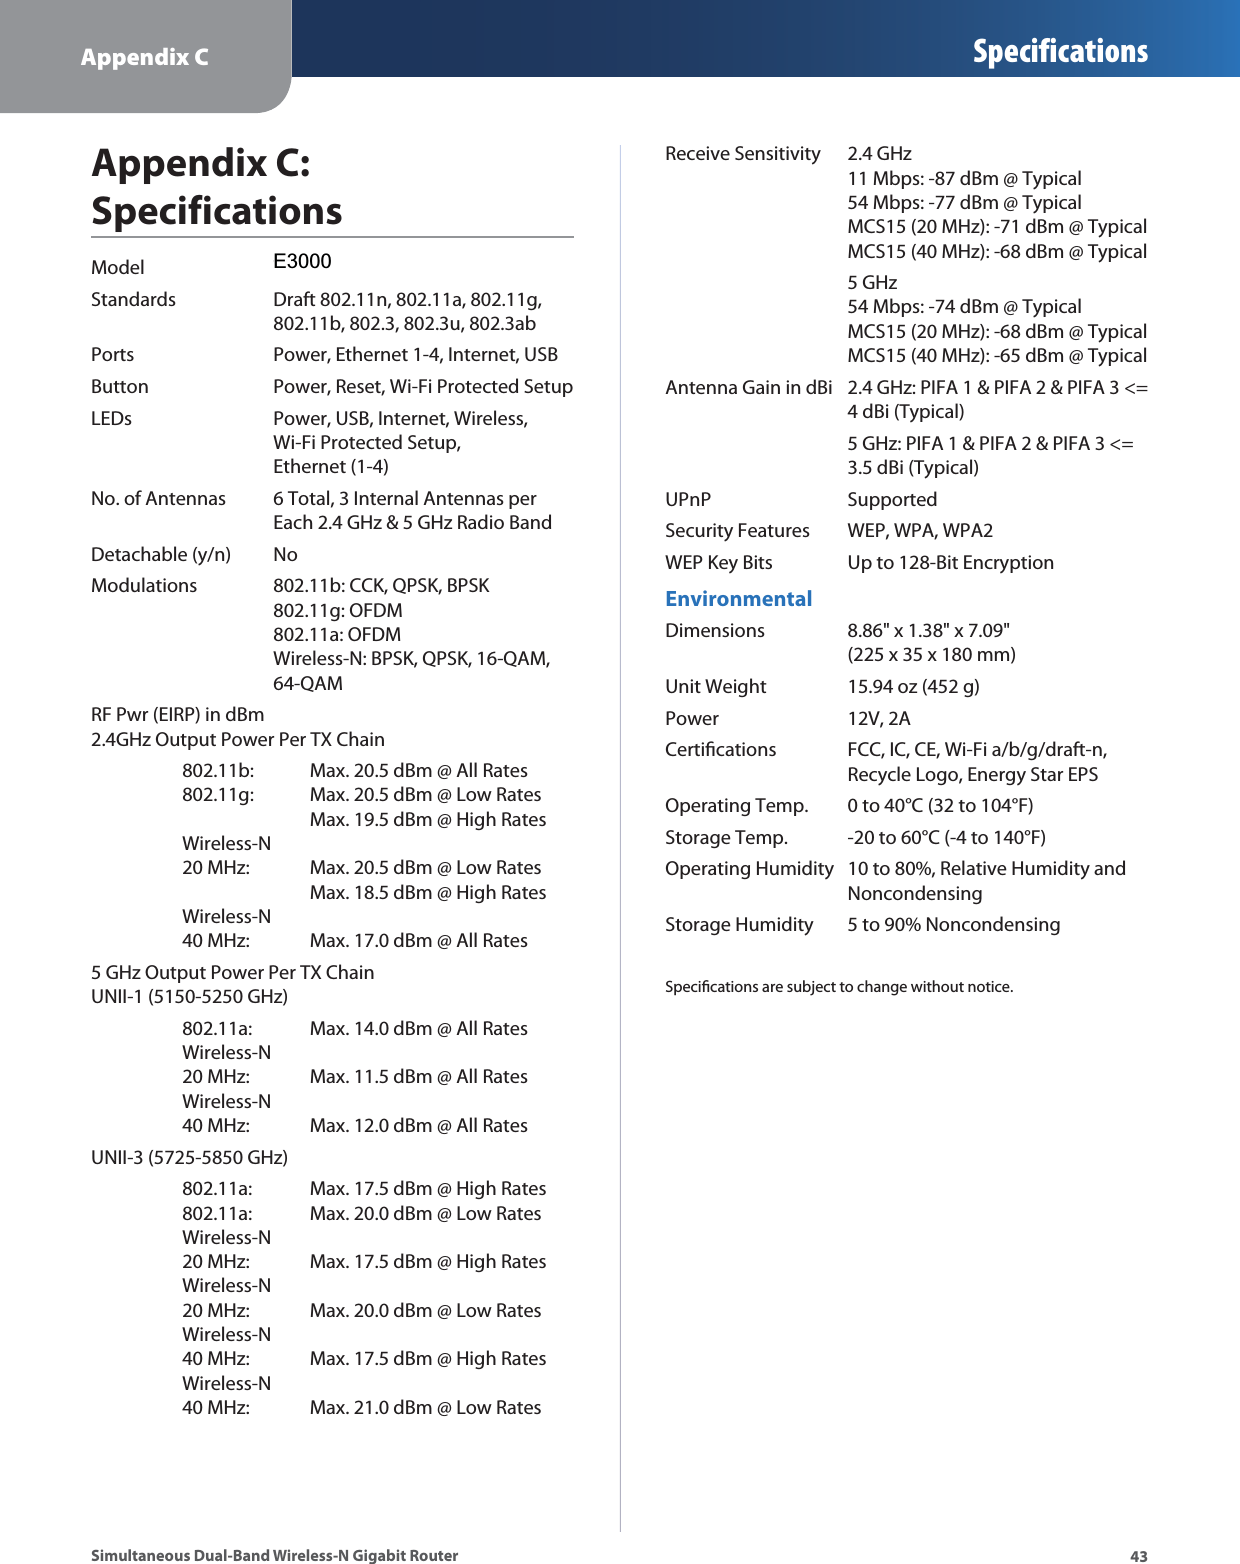 Appendix C Specifications43Simultaneous Dual-Band Wireless-N Gigabit RouterAppendix C: SpecificationsModel WRT610NStandards  Draft 802.11n, 802.11a, 802.11g, 802.11b, 802.3, 802.3u, 802.3abPorts  Power, Ethernet 1-4, Internet, USBButton  Power, Reset, Wi-Fi Protected SetupLEDs  Power, USB, Internet, Wireless, Wi-Fi Protected Setup, Ethernet (1-4)No. of Antennas  6 Total, 3 Internal Antennas per  Each 2.4 GHz &amp; 5 GHz Radio BandDetachable (y/n)  NoModulations  802.11b: CCK, QPSK, BPSK  802.11g: OFDM 802.11a: OFDM Wireless-N: BPSK, QPSK, 16-QAM, 64-QAMRF Pwr (EIRP) in dBm 2.4GHz Output Power Per TX Chain802.11b:  Max. 20.5 dBm @ All Rates 802.11g:   Max. 20.5 dBm @ Low Rates       Max. 19.5 dBm @ High Rates Wireless-N  20 MHz:  Max. 20.5 dBm @ Low Rates       Max. 18.5 dBm @ High Rates Wireless-N  40 MHz:  Max. 17.0 dBm @ All Rates5 GHz Output Power Per TX Chain UNII-1 (5150-5250 GHz)802.11a:  Max. 14.0 dBm @ All Rates Wireless-N  20 MHz:  Max. 11.5 dBm @ All Rates Wireless-N  40 MHz:   Max. 12.0 dBm @ All RatesUNII-3 (5725-5850 GHz)802.11a:  Max. 17.5 dBm @ High Rates 802.11a:   Max. 20.0 dBm @ Low Rates Wireless-N  20 MHz:  Max. 17.5 dBm @ High Rates Wireless-N  20 MHz:  Max. 20.0 dBm @ Low Rates Wireless-N  40 MHz:  Max. 17.5 dBm @ High Rates Wireless-N  40 MHz:  Max. 21.0 dBm @ Low RatesReceive Sensitivity  2.4 GHz   11 Mbps: -87 dBm @ Typical   54 Mbps: -77 dBm @ Typical   MCS15 (20 MHz): -71 dBm @ Typical   MCS15 (40 MHz): -68 dBm @ Typical 5 GHz   54 Mbps: -74 dBm @ Typical   MCS15 (20 MHz): -68 dBm @ Typical   MCS15 (40 MHz): -65 dBm @ TypicalAntenna Gain in dBi  2.4 GHz: PIFA 1 &amp; PIFA 2 &amp; PIFA 3 &lt;=   4 dBi (Typical)  5 GHz: PIFA 1 &amp; PIFA 2 &amp; PIFA 3 &lt;=   3.5 dBi (Typical)UPnP   SupportedSecurity Features  WEP, WPA, WPA2WEP Key Bits  Up to 128-Bit EncryptionEnvironmentalDimensions  8.86&quot; x 1.38&quot; x 7.09&quot;   (225 x 35 x 180 mm)Unit Weight  15.94 oz (452 g)Power 12V, 2ACertiﬁcations  FCC, IC, CE, Wi-Fi a/b/g/draft-n,    Recycle Logo, Energy Star EPSOperating Temp.  0 to 40°C (32 to 104°F)Storage Temp.  -20 to 60°C (-4 to 140°F)Operating Humidity  10 to 80%, Relative Humidity and   NoncondensingStorage Humidity  5 to 90% NoncondensingSpeciﬁcations are subject to change without notice.E3000